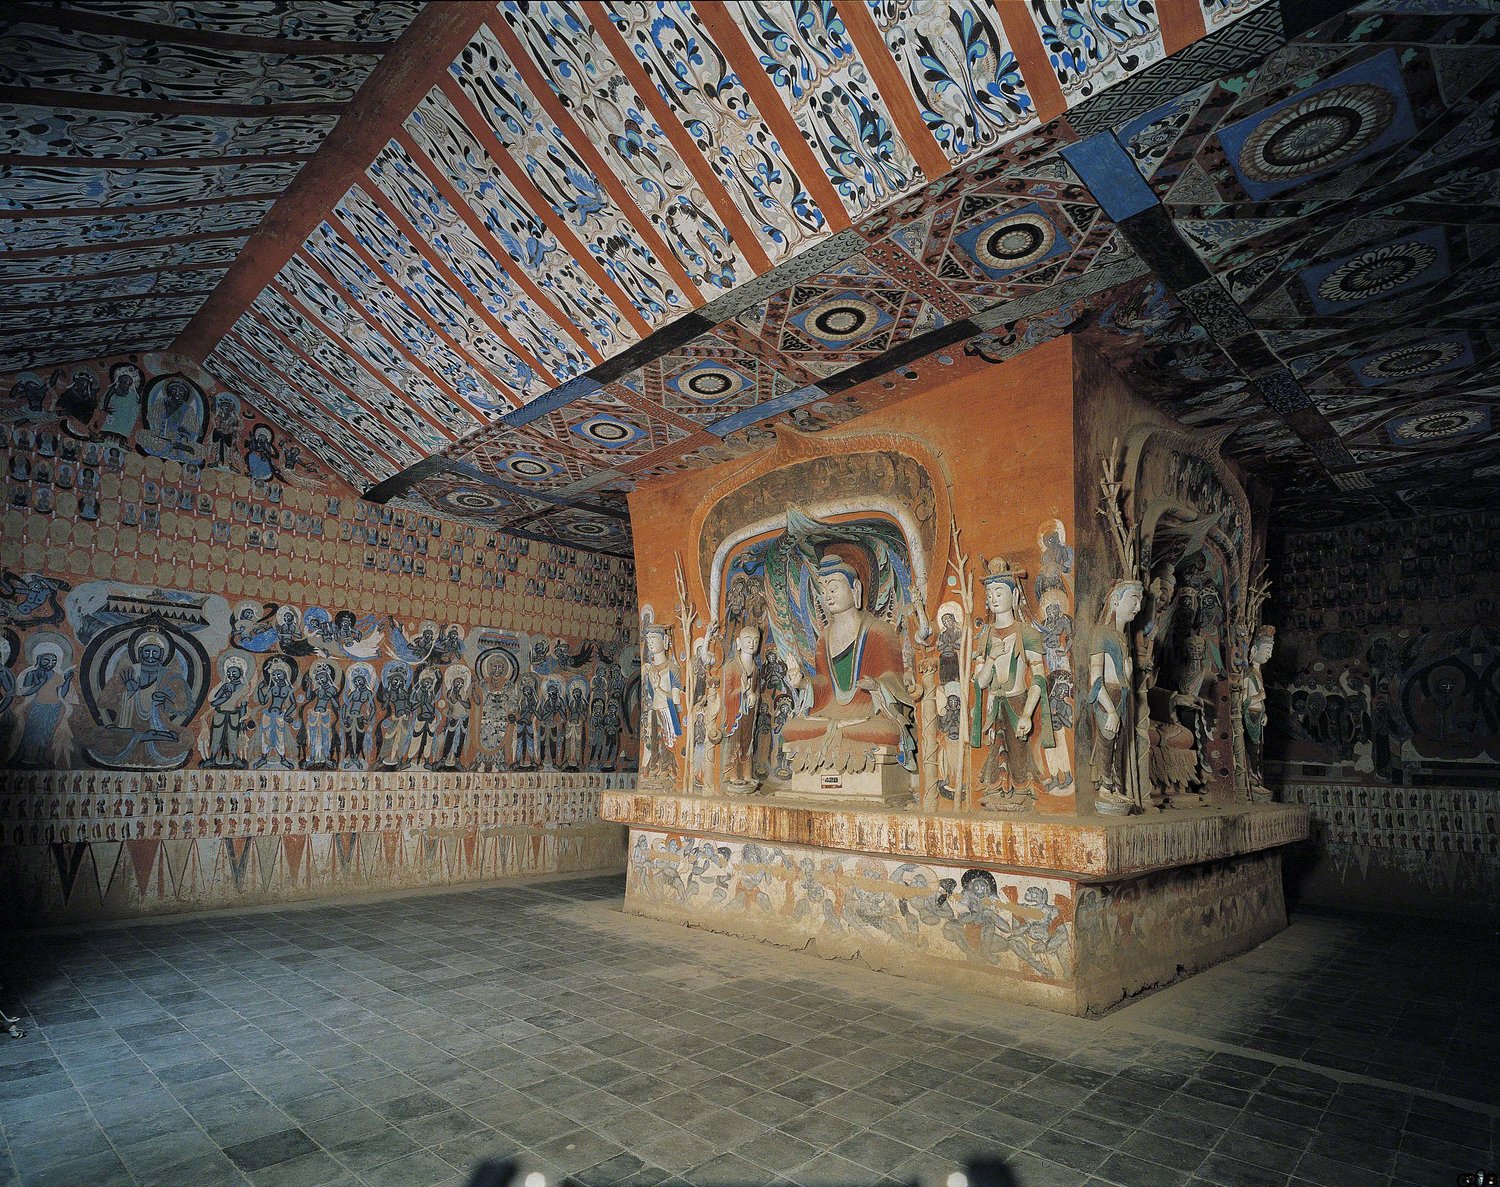 The central pillar in Mogao Cave 428. Northern Zhou dynasty. 557-581 CE. Dunhuang. Image courtesy of the Dunhuang Academy.